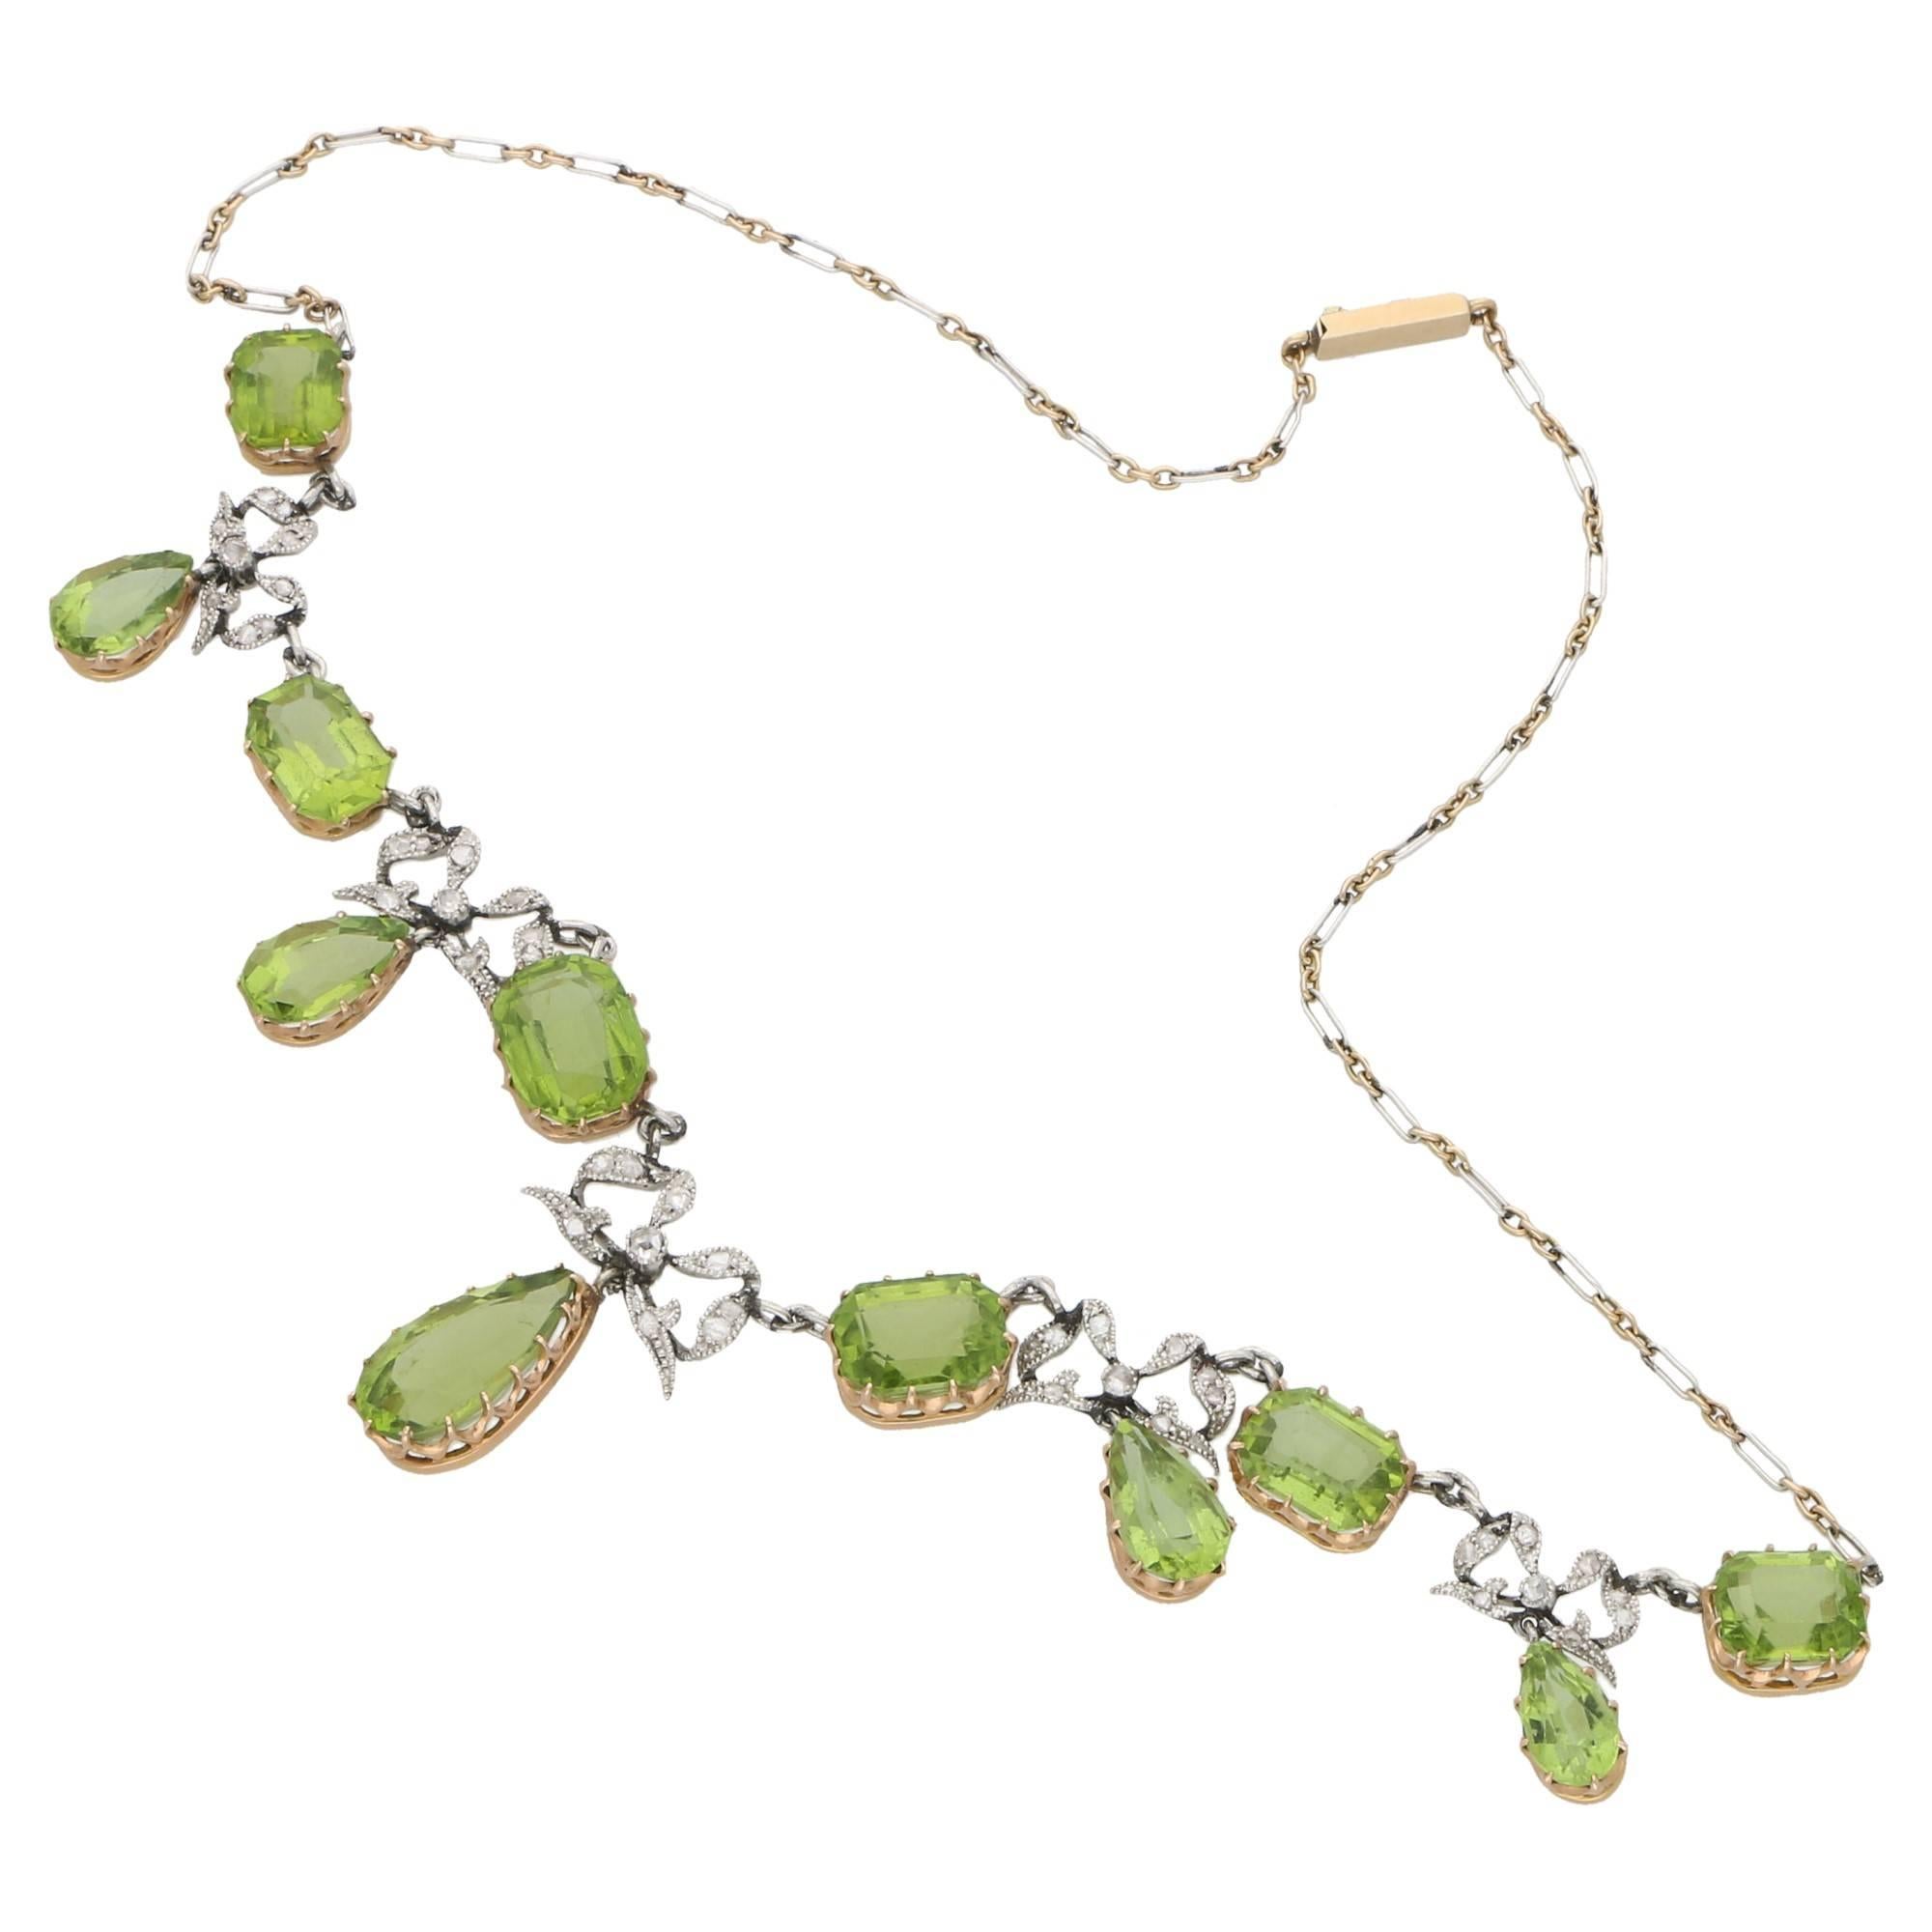 An Edwardian peridot and diamond necklace, set in platinum, backed in gold. With six step-cut peridots claw set in 18ct yellow gold aligned along the chain. Then a further five pear-cut claw set peridots suspended from diamond set platinum bows.